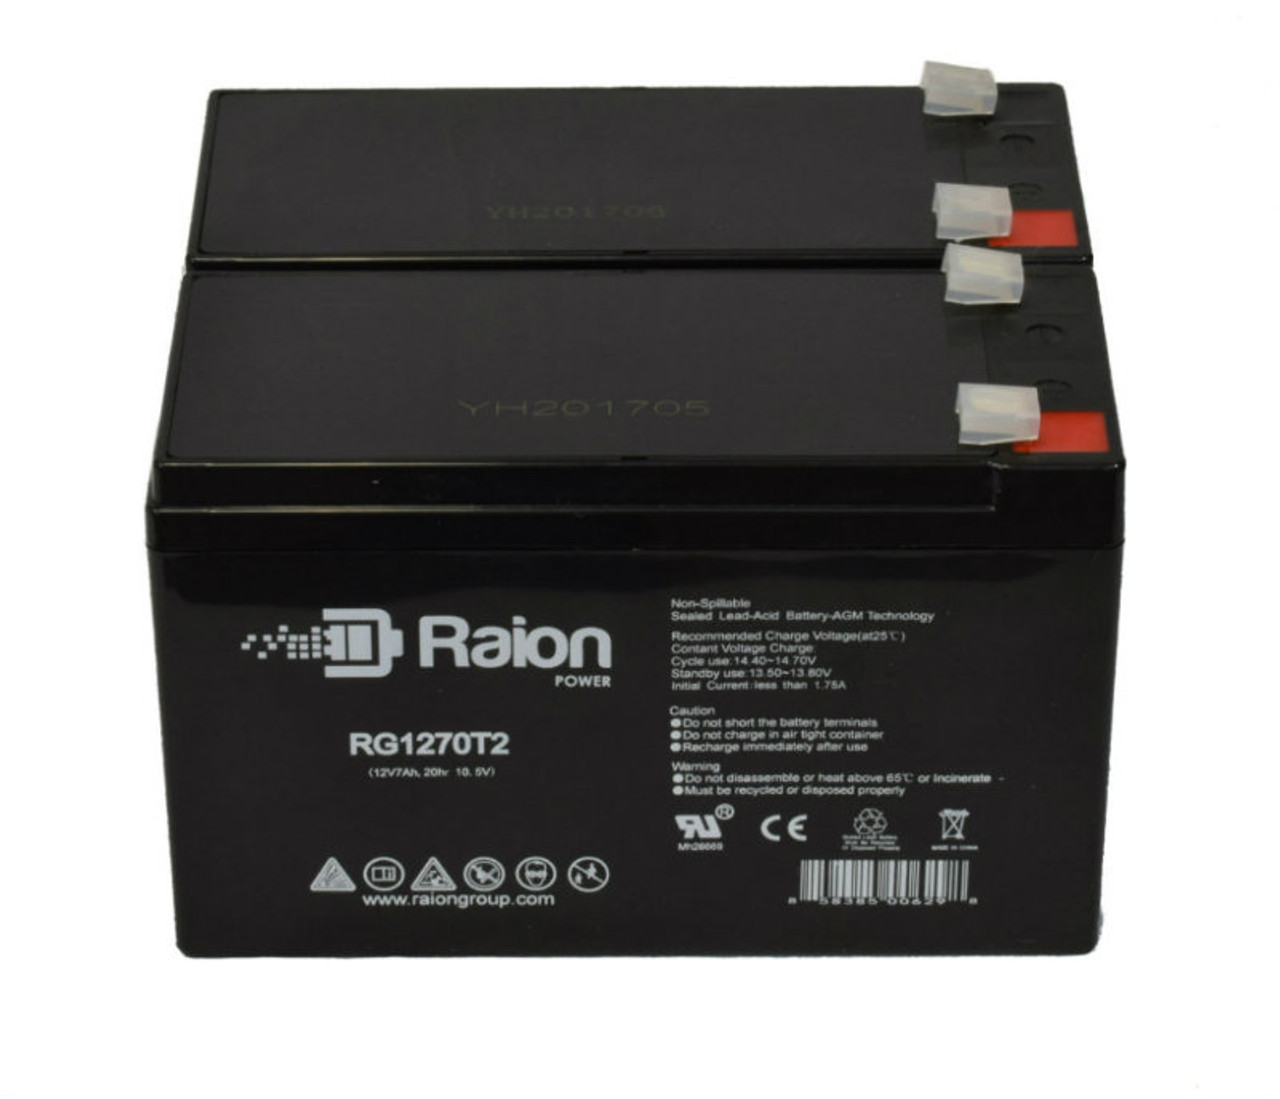 Raion Power Replacement 12V 7Ah Battery for Sealake UM1207 - 2 Pack